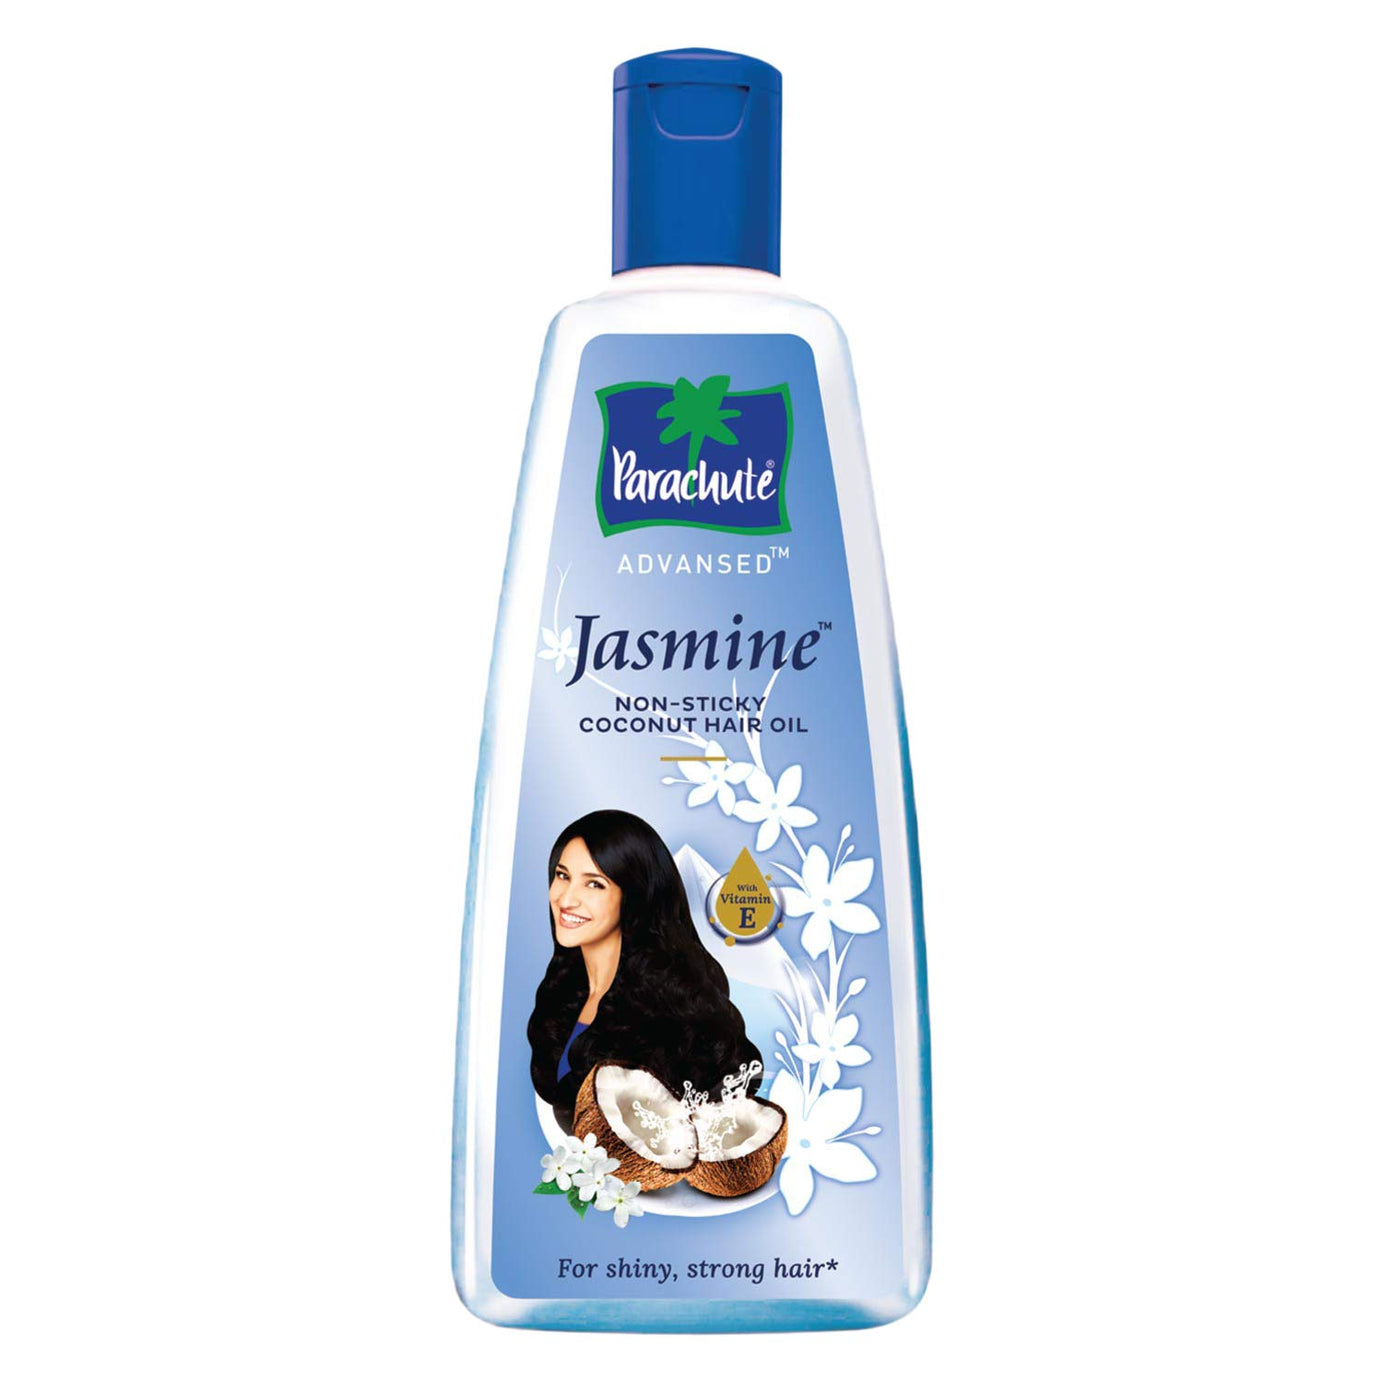 Shop Parachute Jasmine Non Sticky Coconut Hair Oil at price 40.00 from Parachute Online - Ayush Care